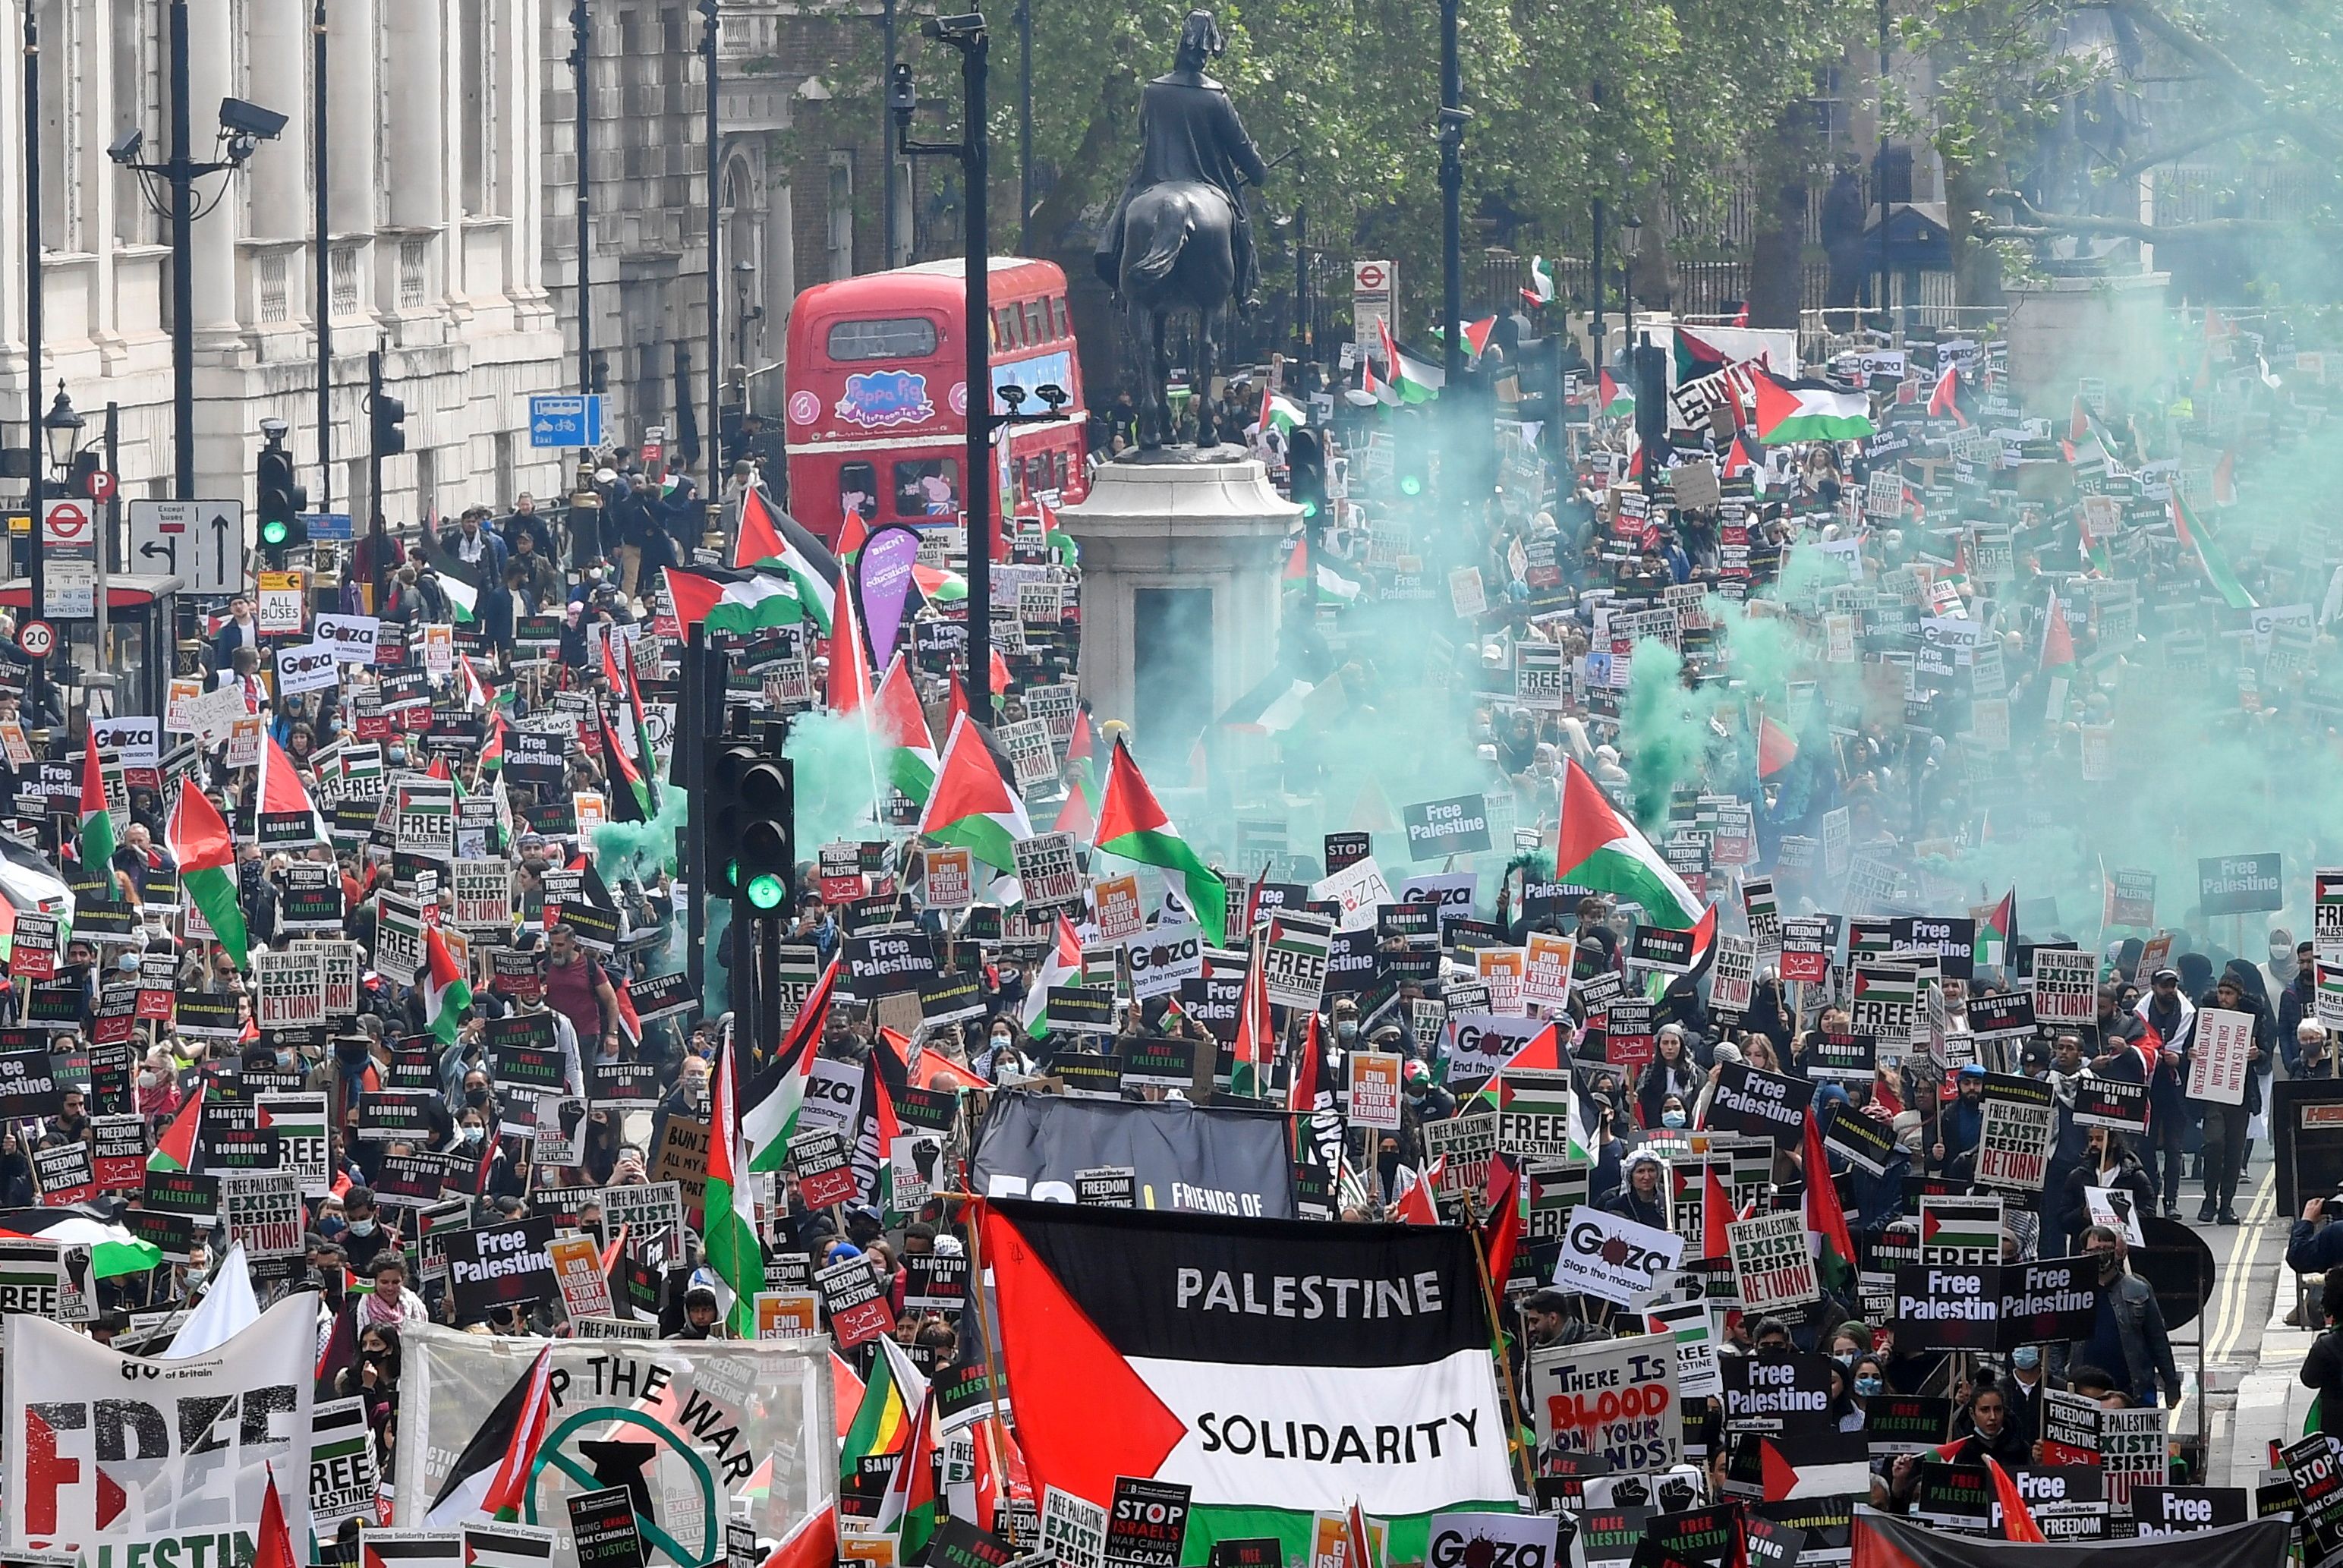 Tens of thousands attend largest proPalestine march in British history